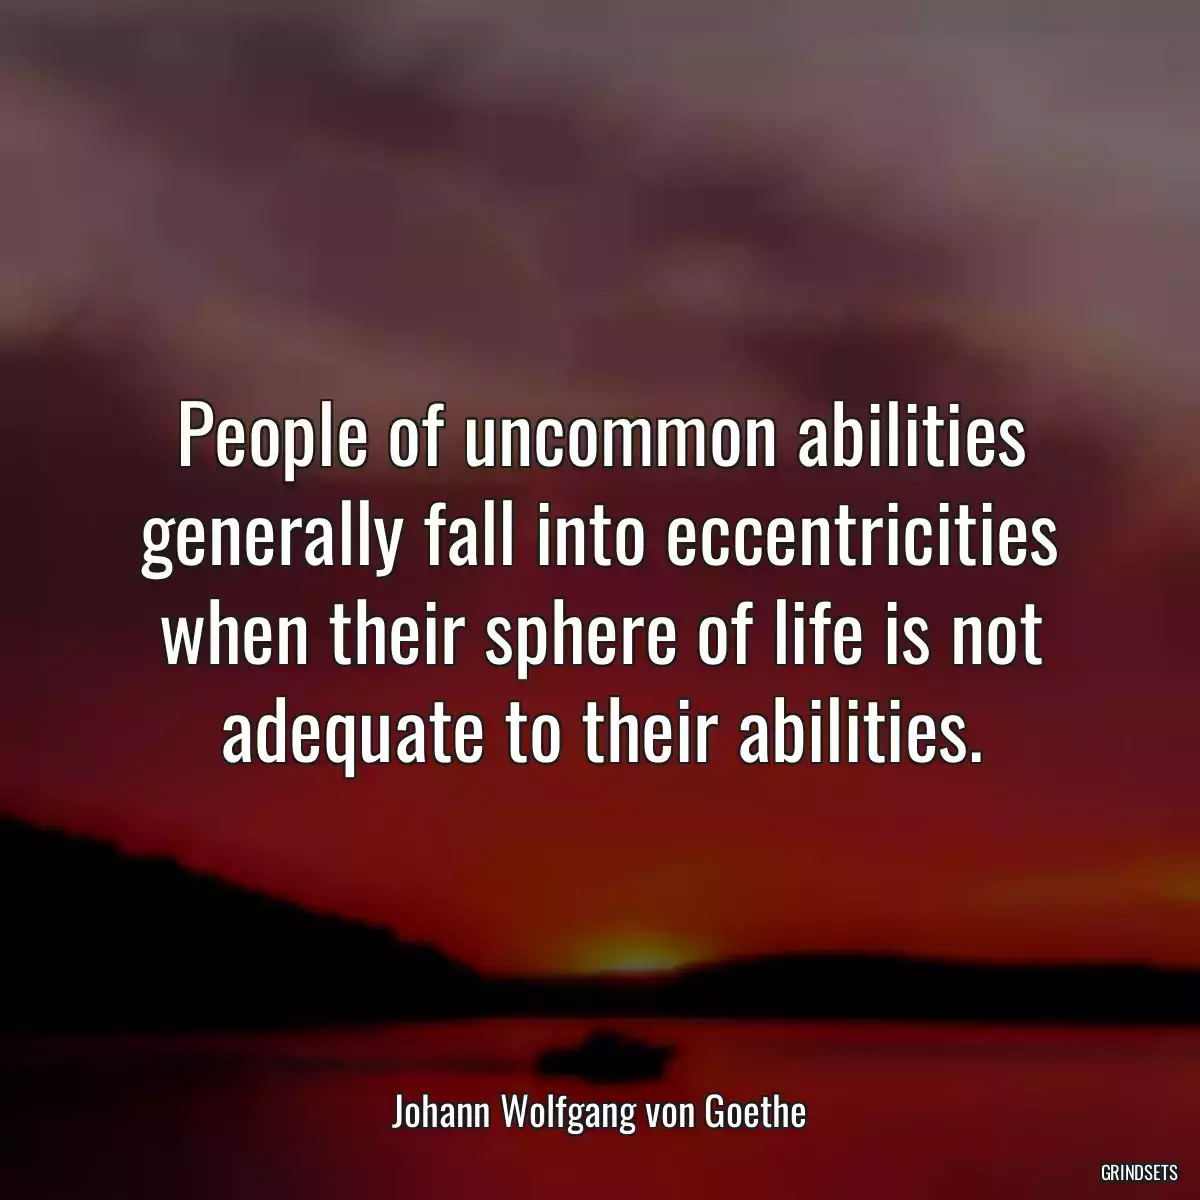 People of uncommon abilities generally fall into eccentricities when their sphere of life is not adequate to their abilities.